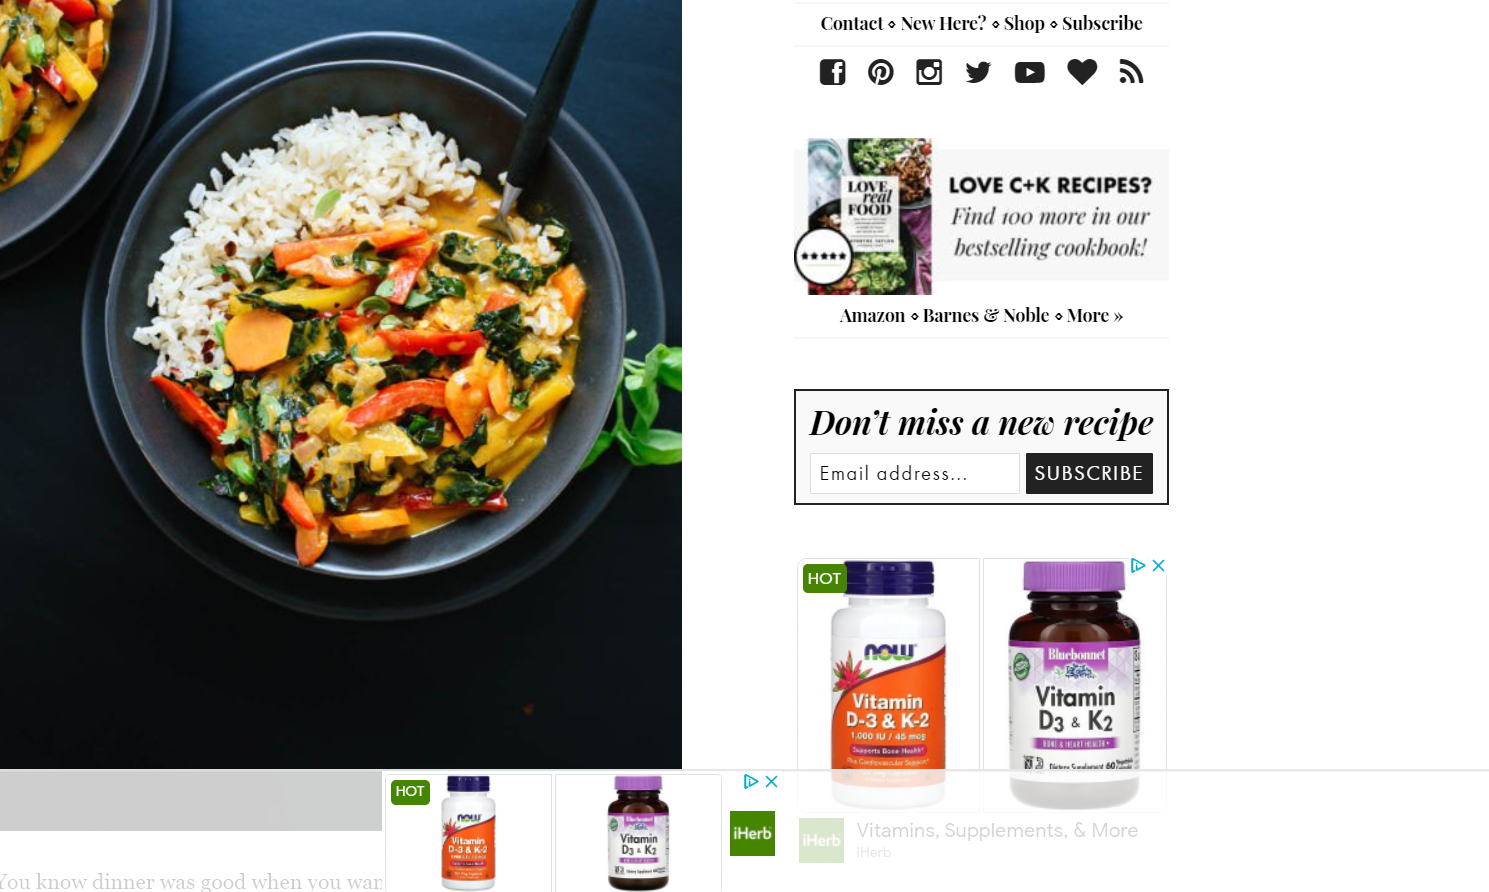 Example of a display ad from iHerb